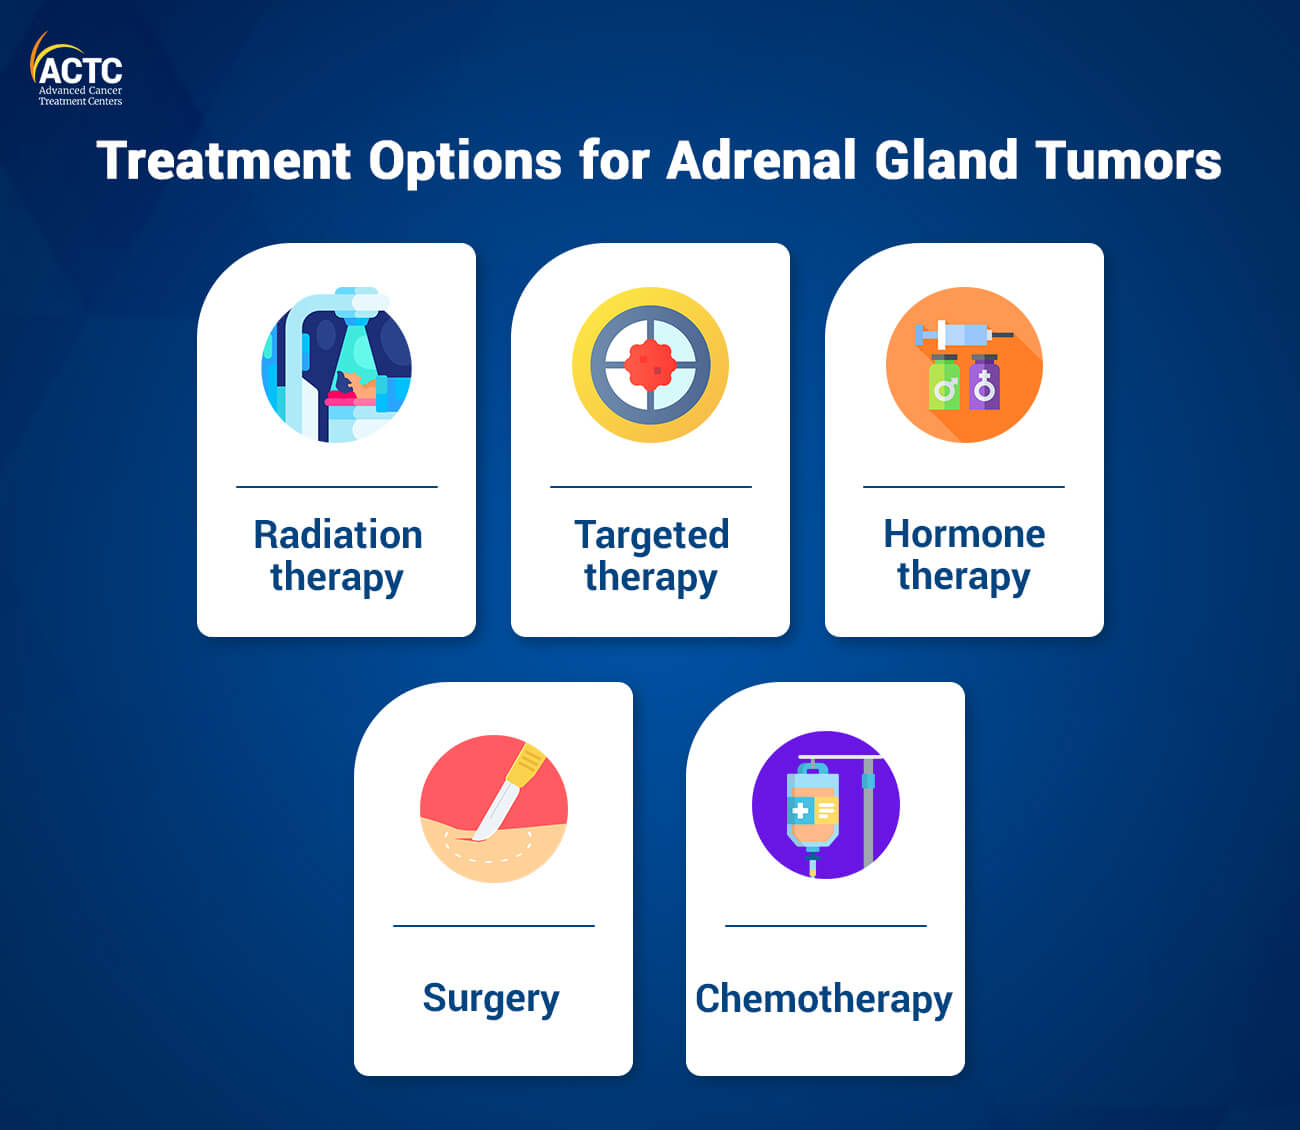 Treatment Options for Adrenal Gland Tumors